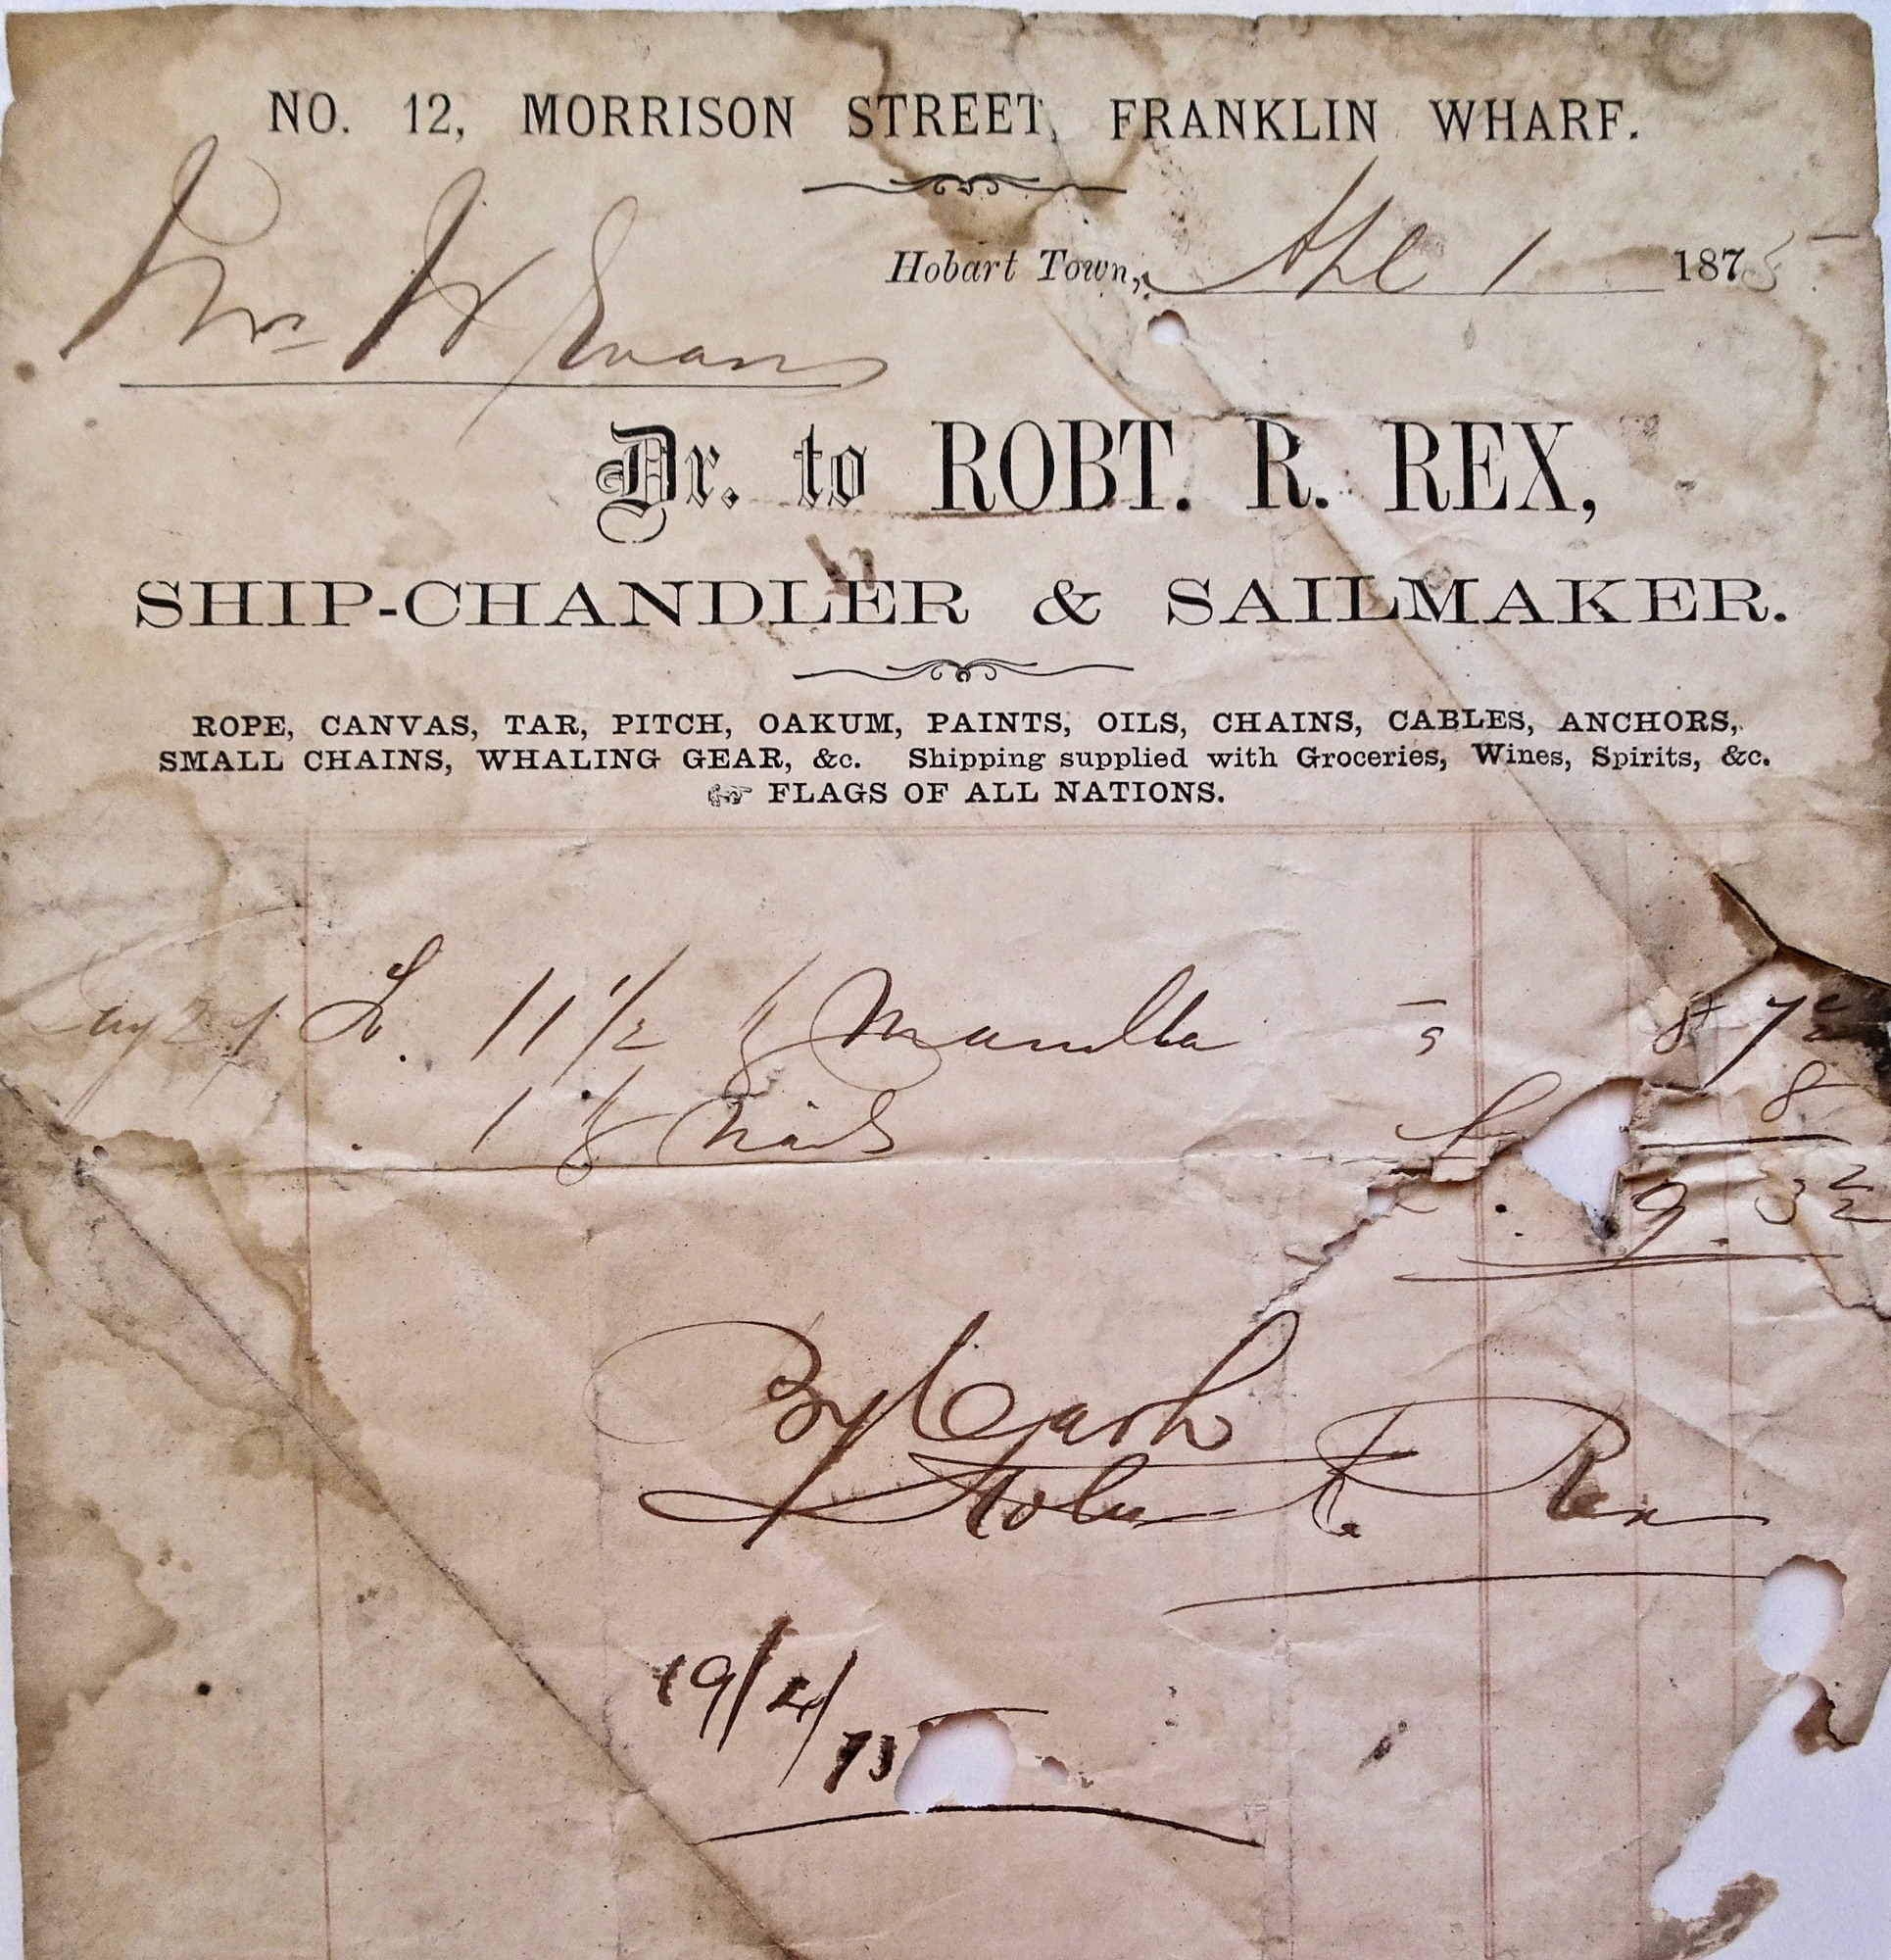 Receipt for manila rope and nails